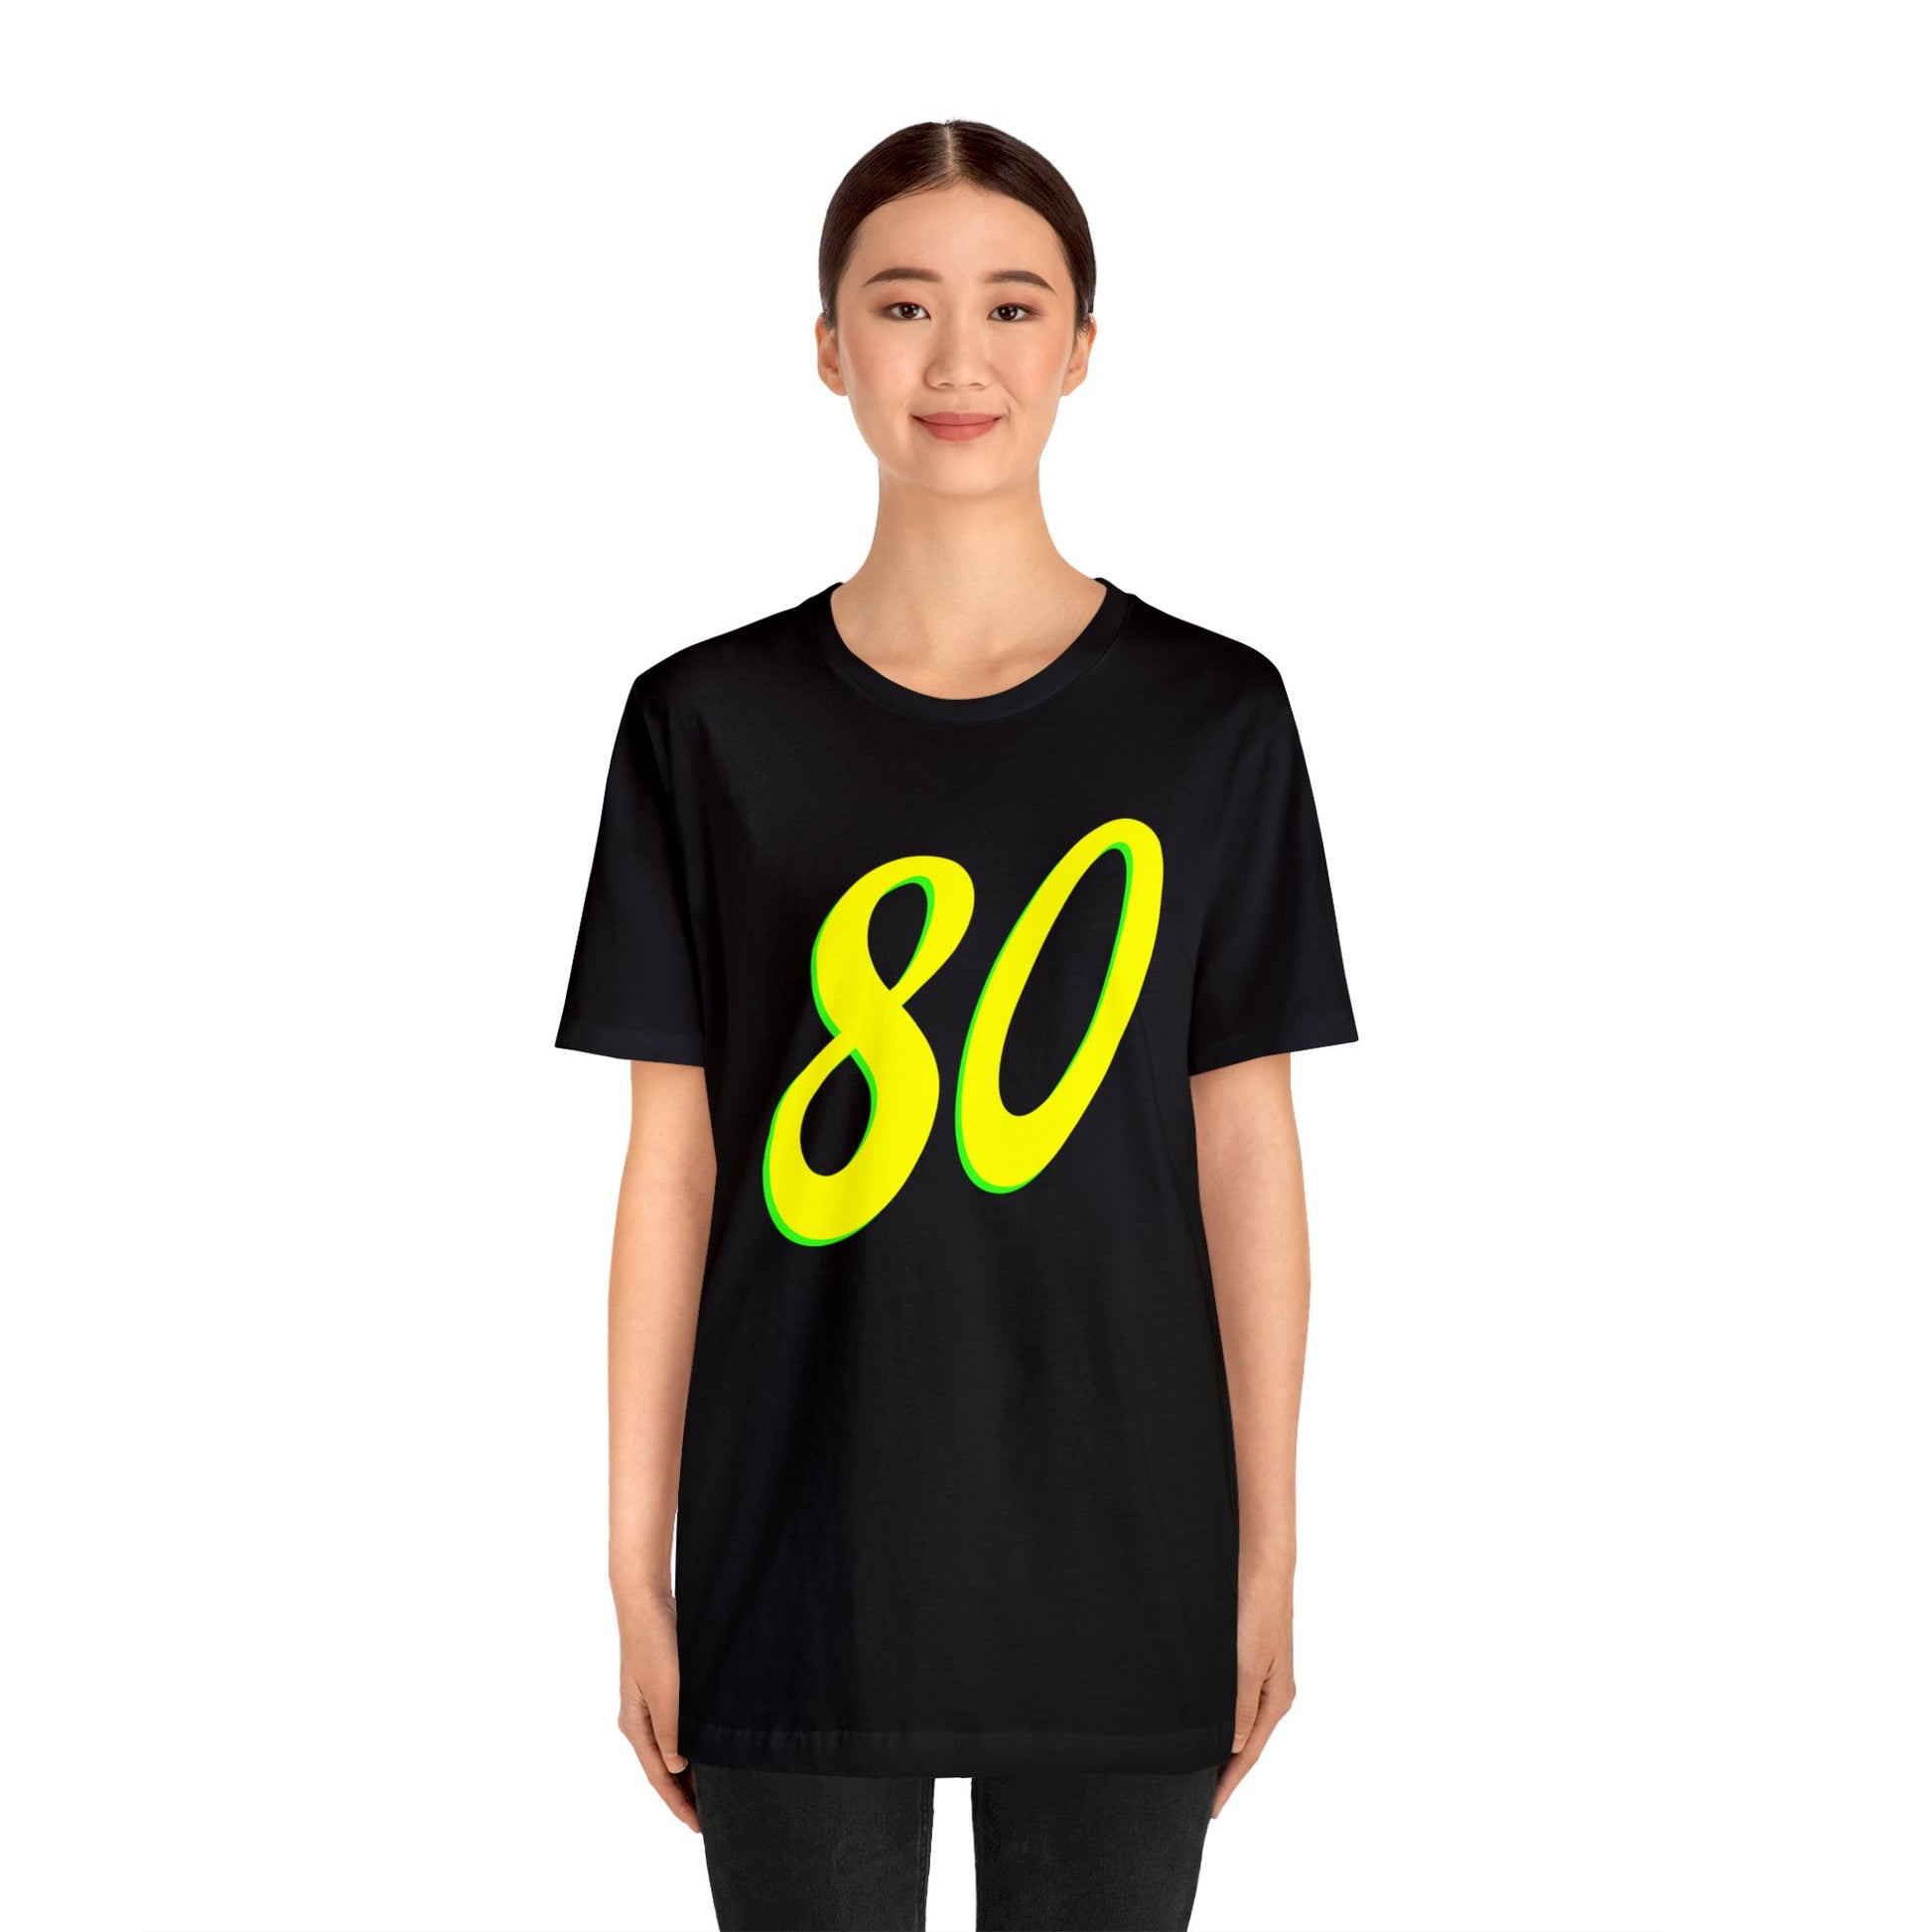 Number 80 Design - Soft Cotton Tee for birthdays and celebrations, Gift for friends and family, Multiple Options by clothezy.com in Black Size Medium - Buy Now